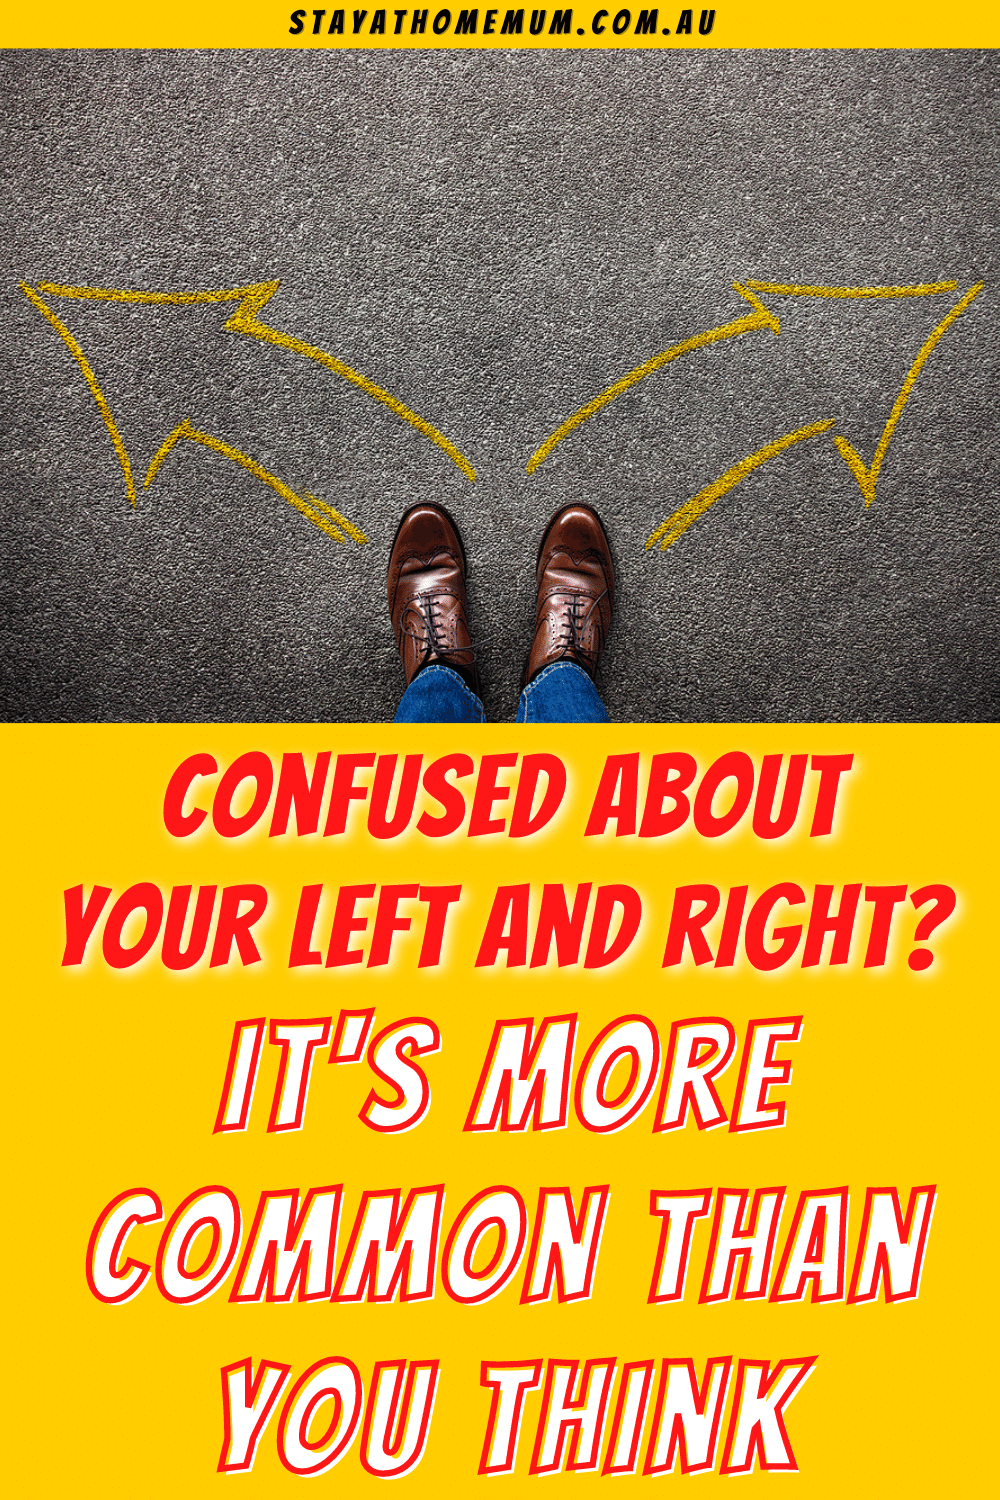 Confused About Your Left and Right? It's More Common Than You Think | Stay At Home Mum